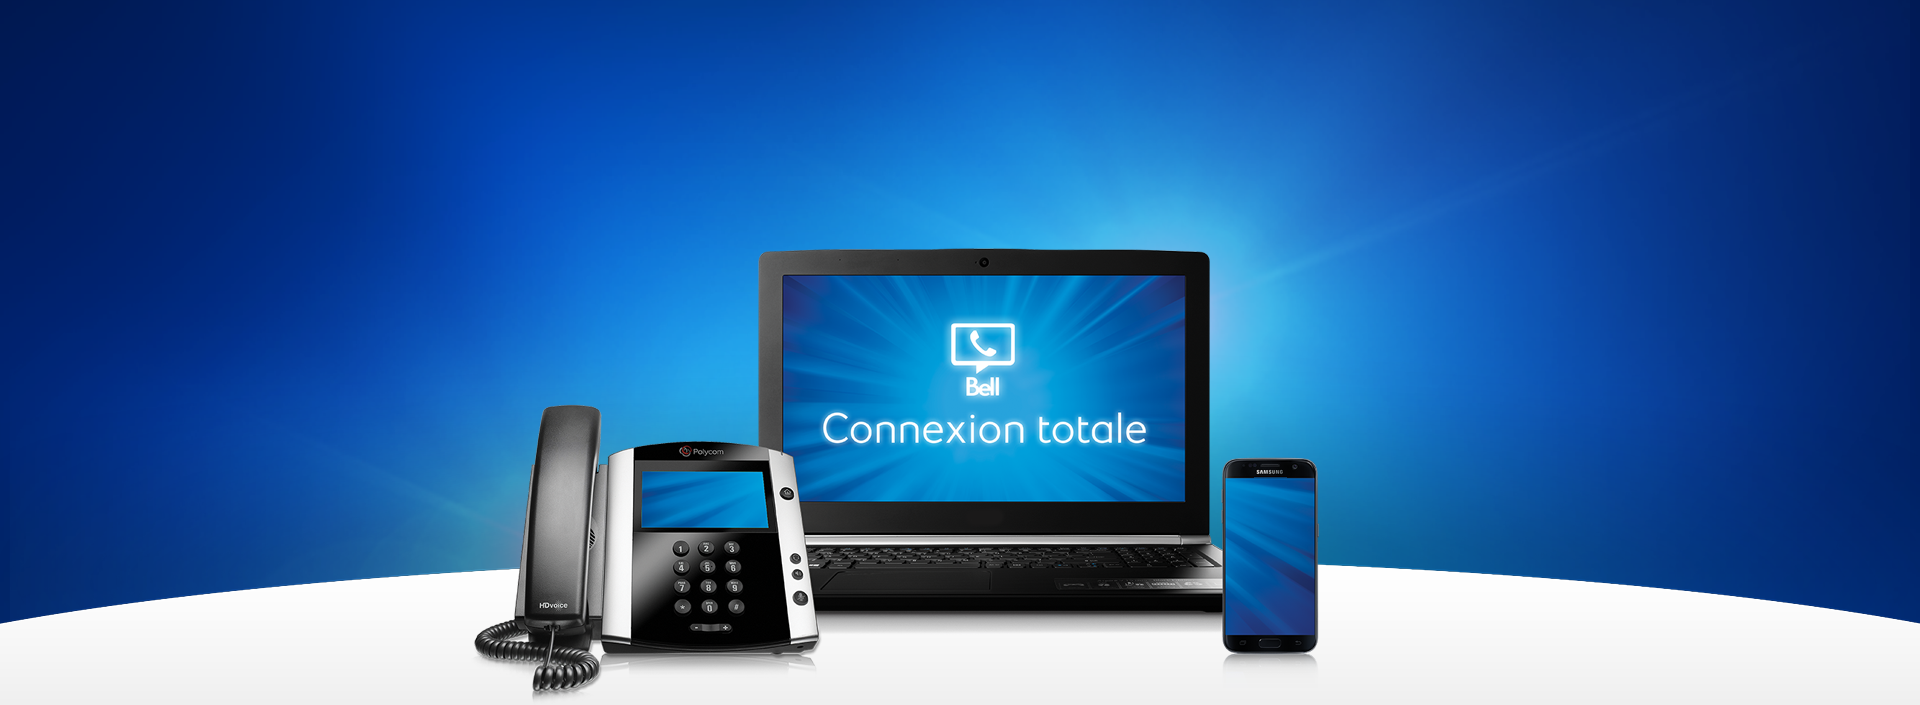 Bell Connexion totale